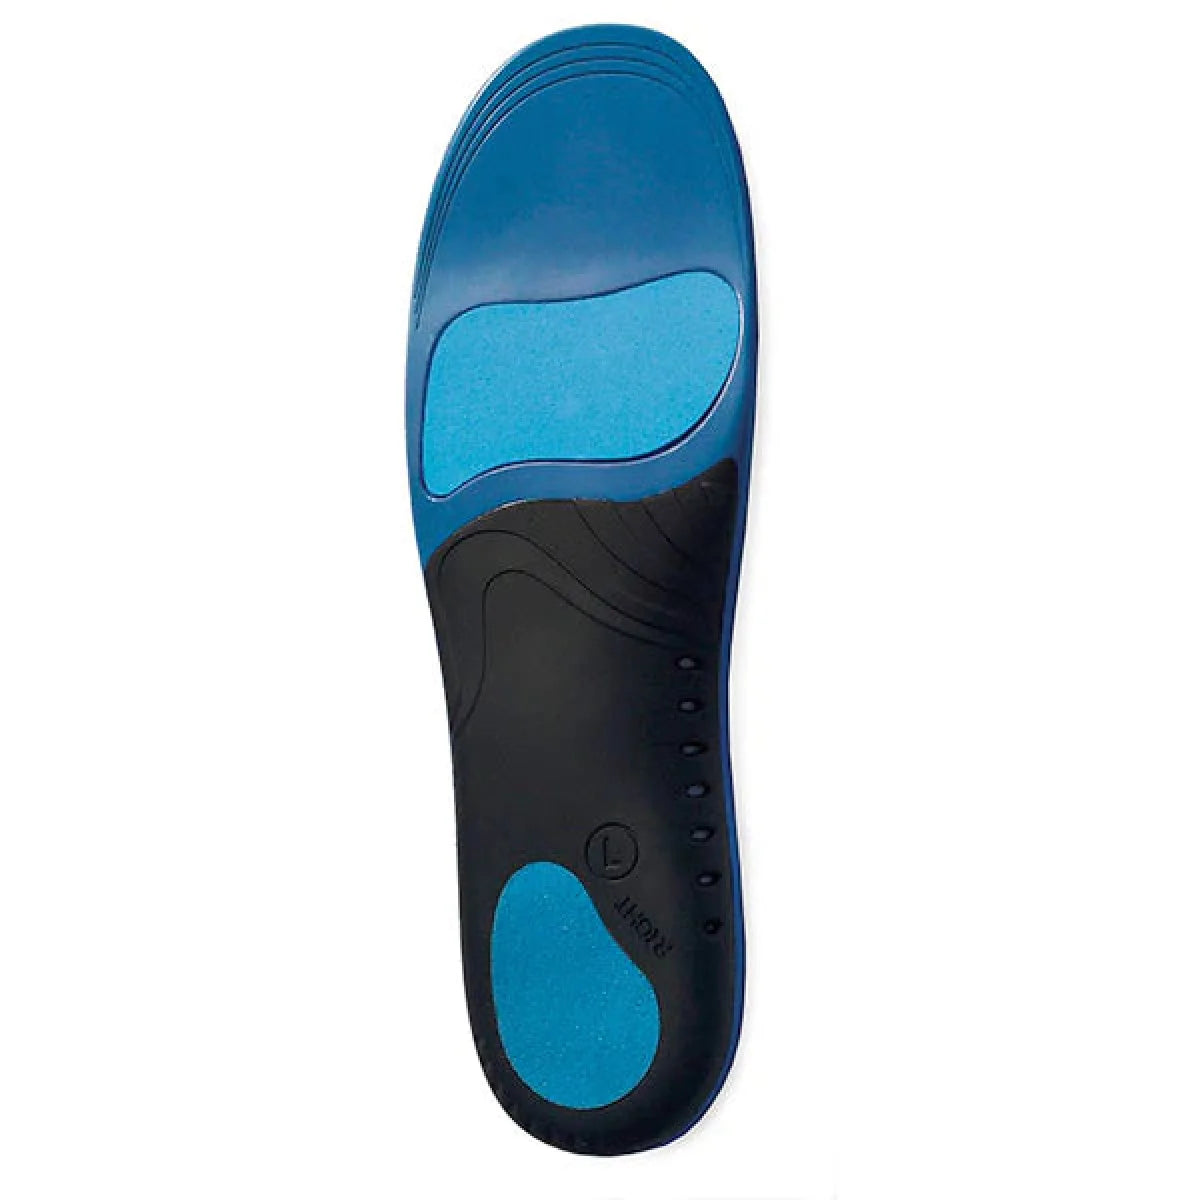 Unisex Ultimate Performance Advanced F3D Cushion Insole